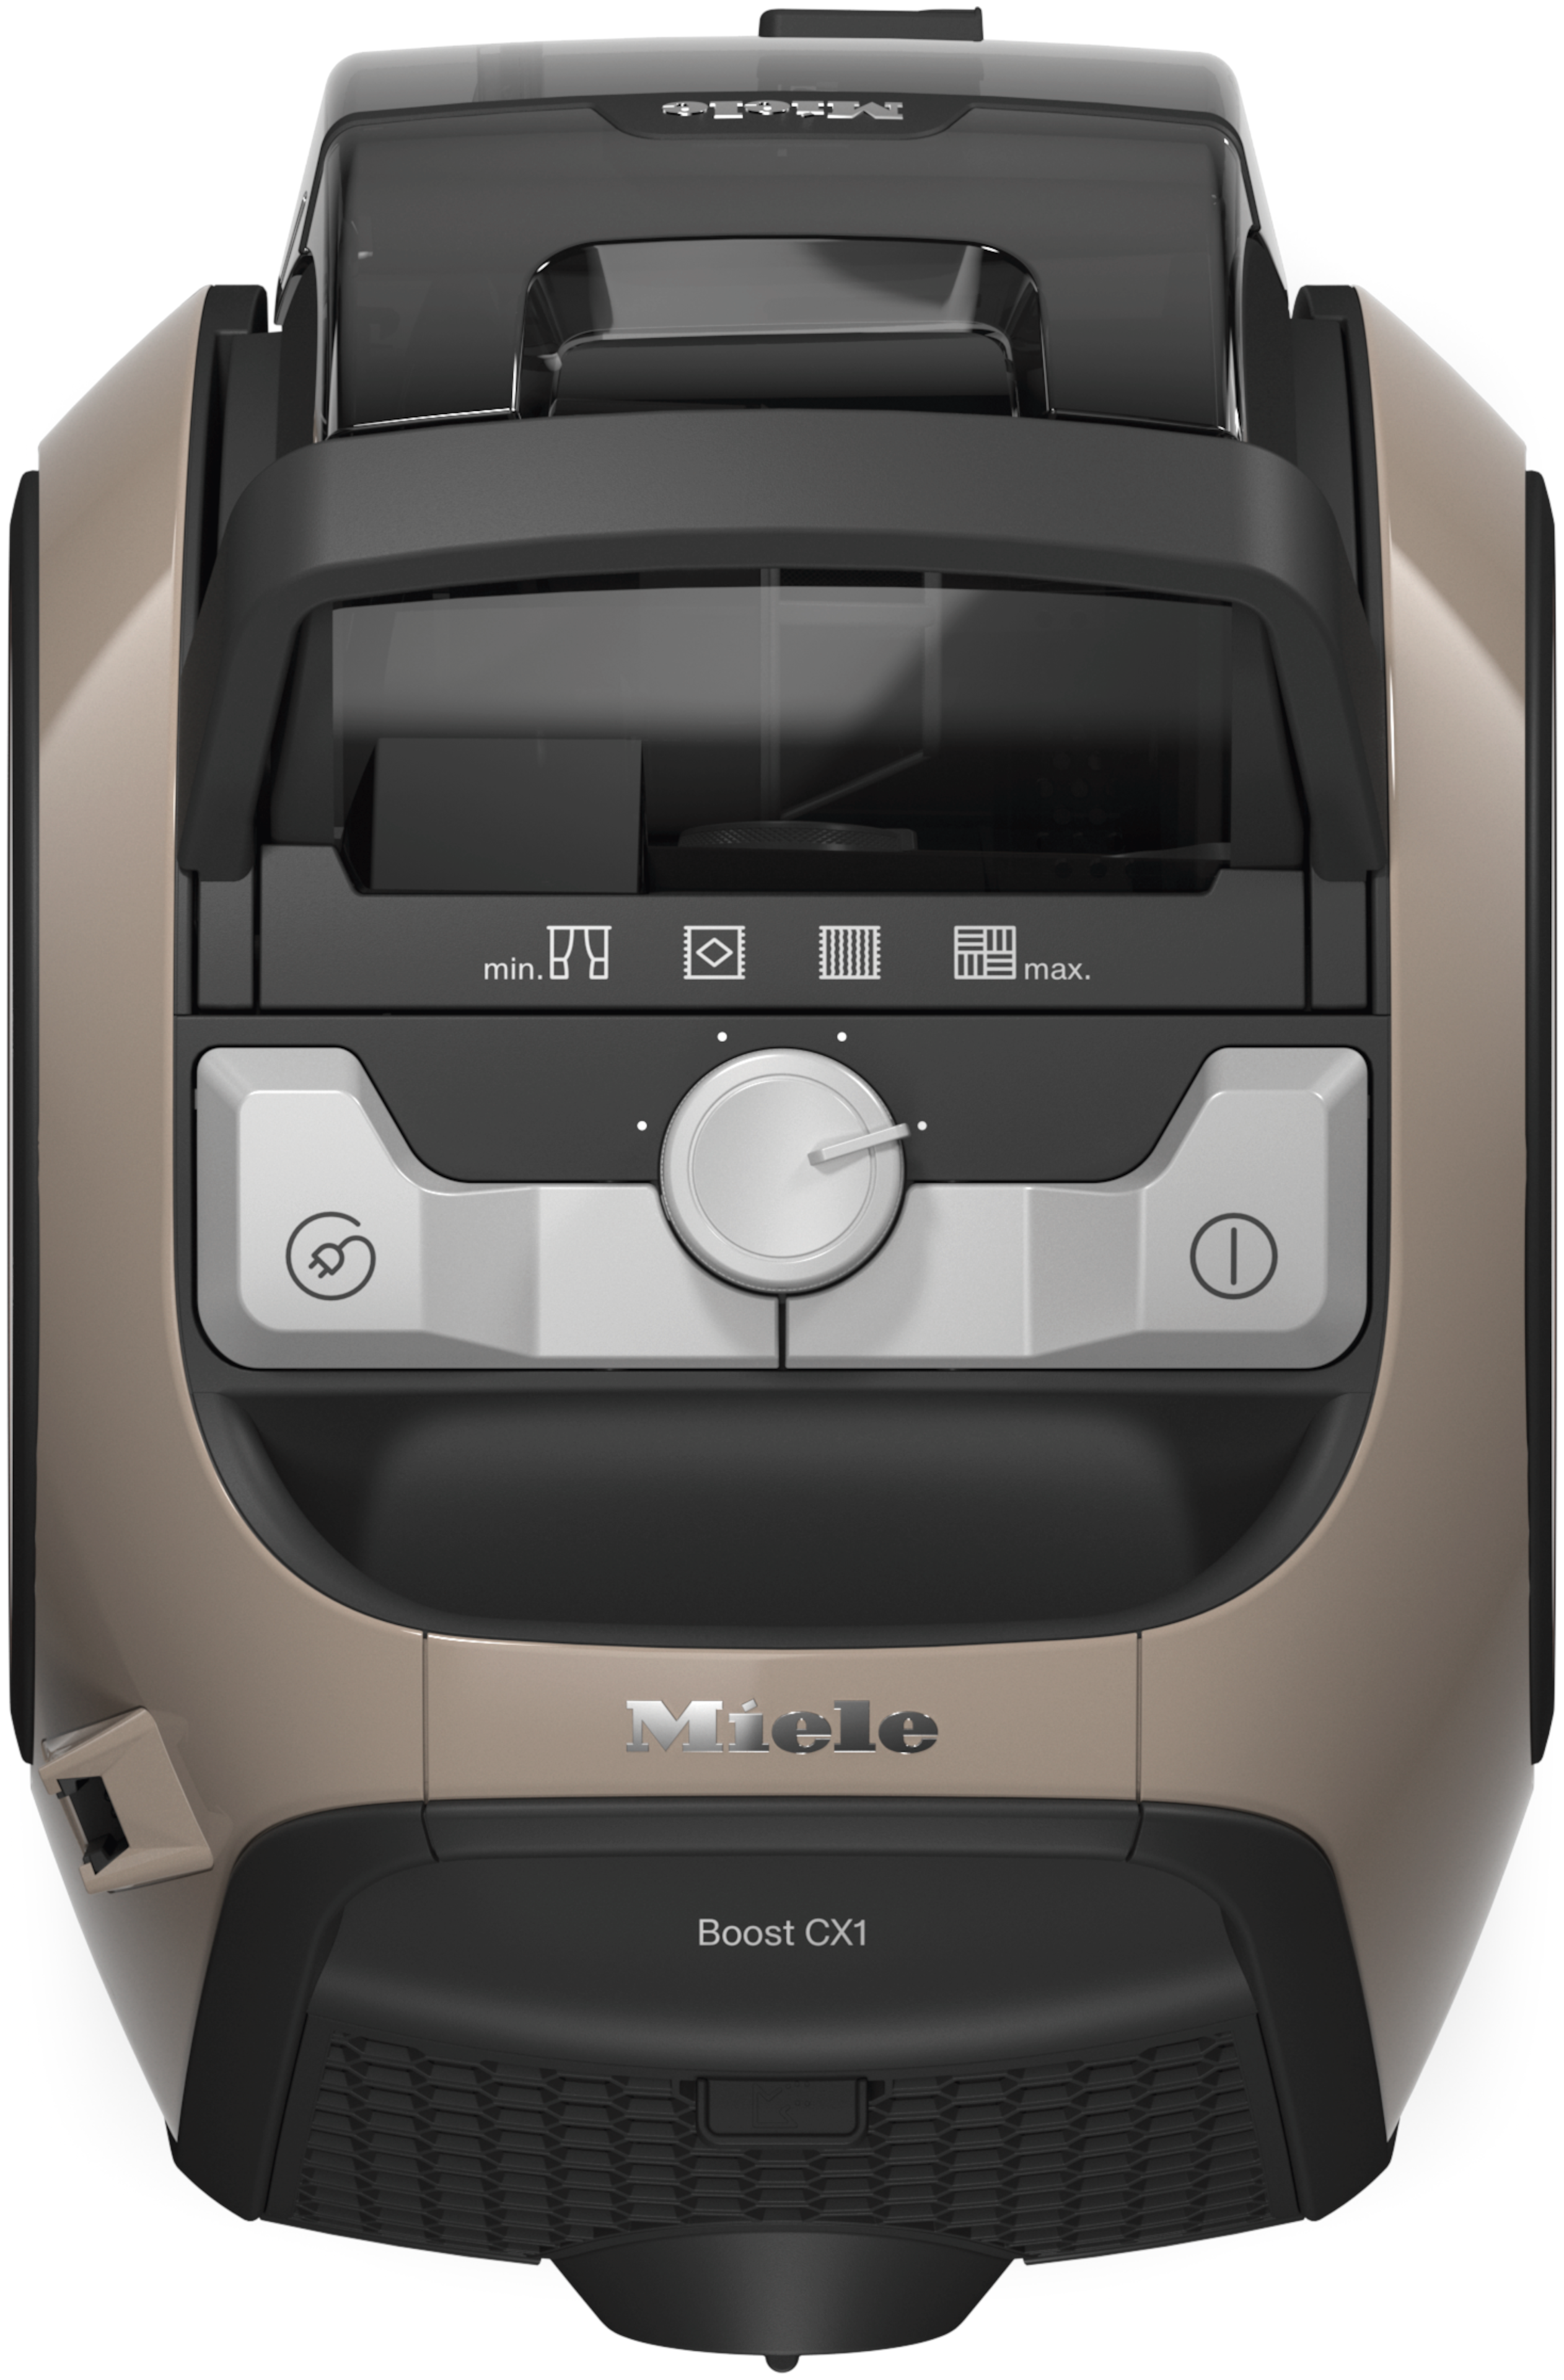 Miele stofzuiger BOOST CX1 ALLERGY afbeelding 3